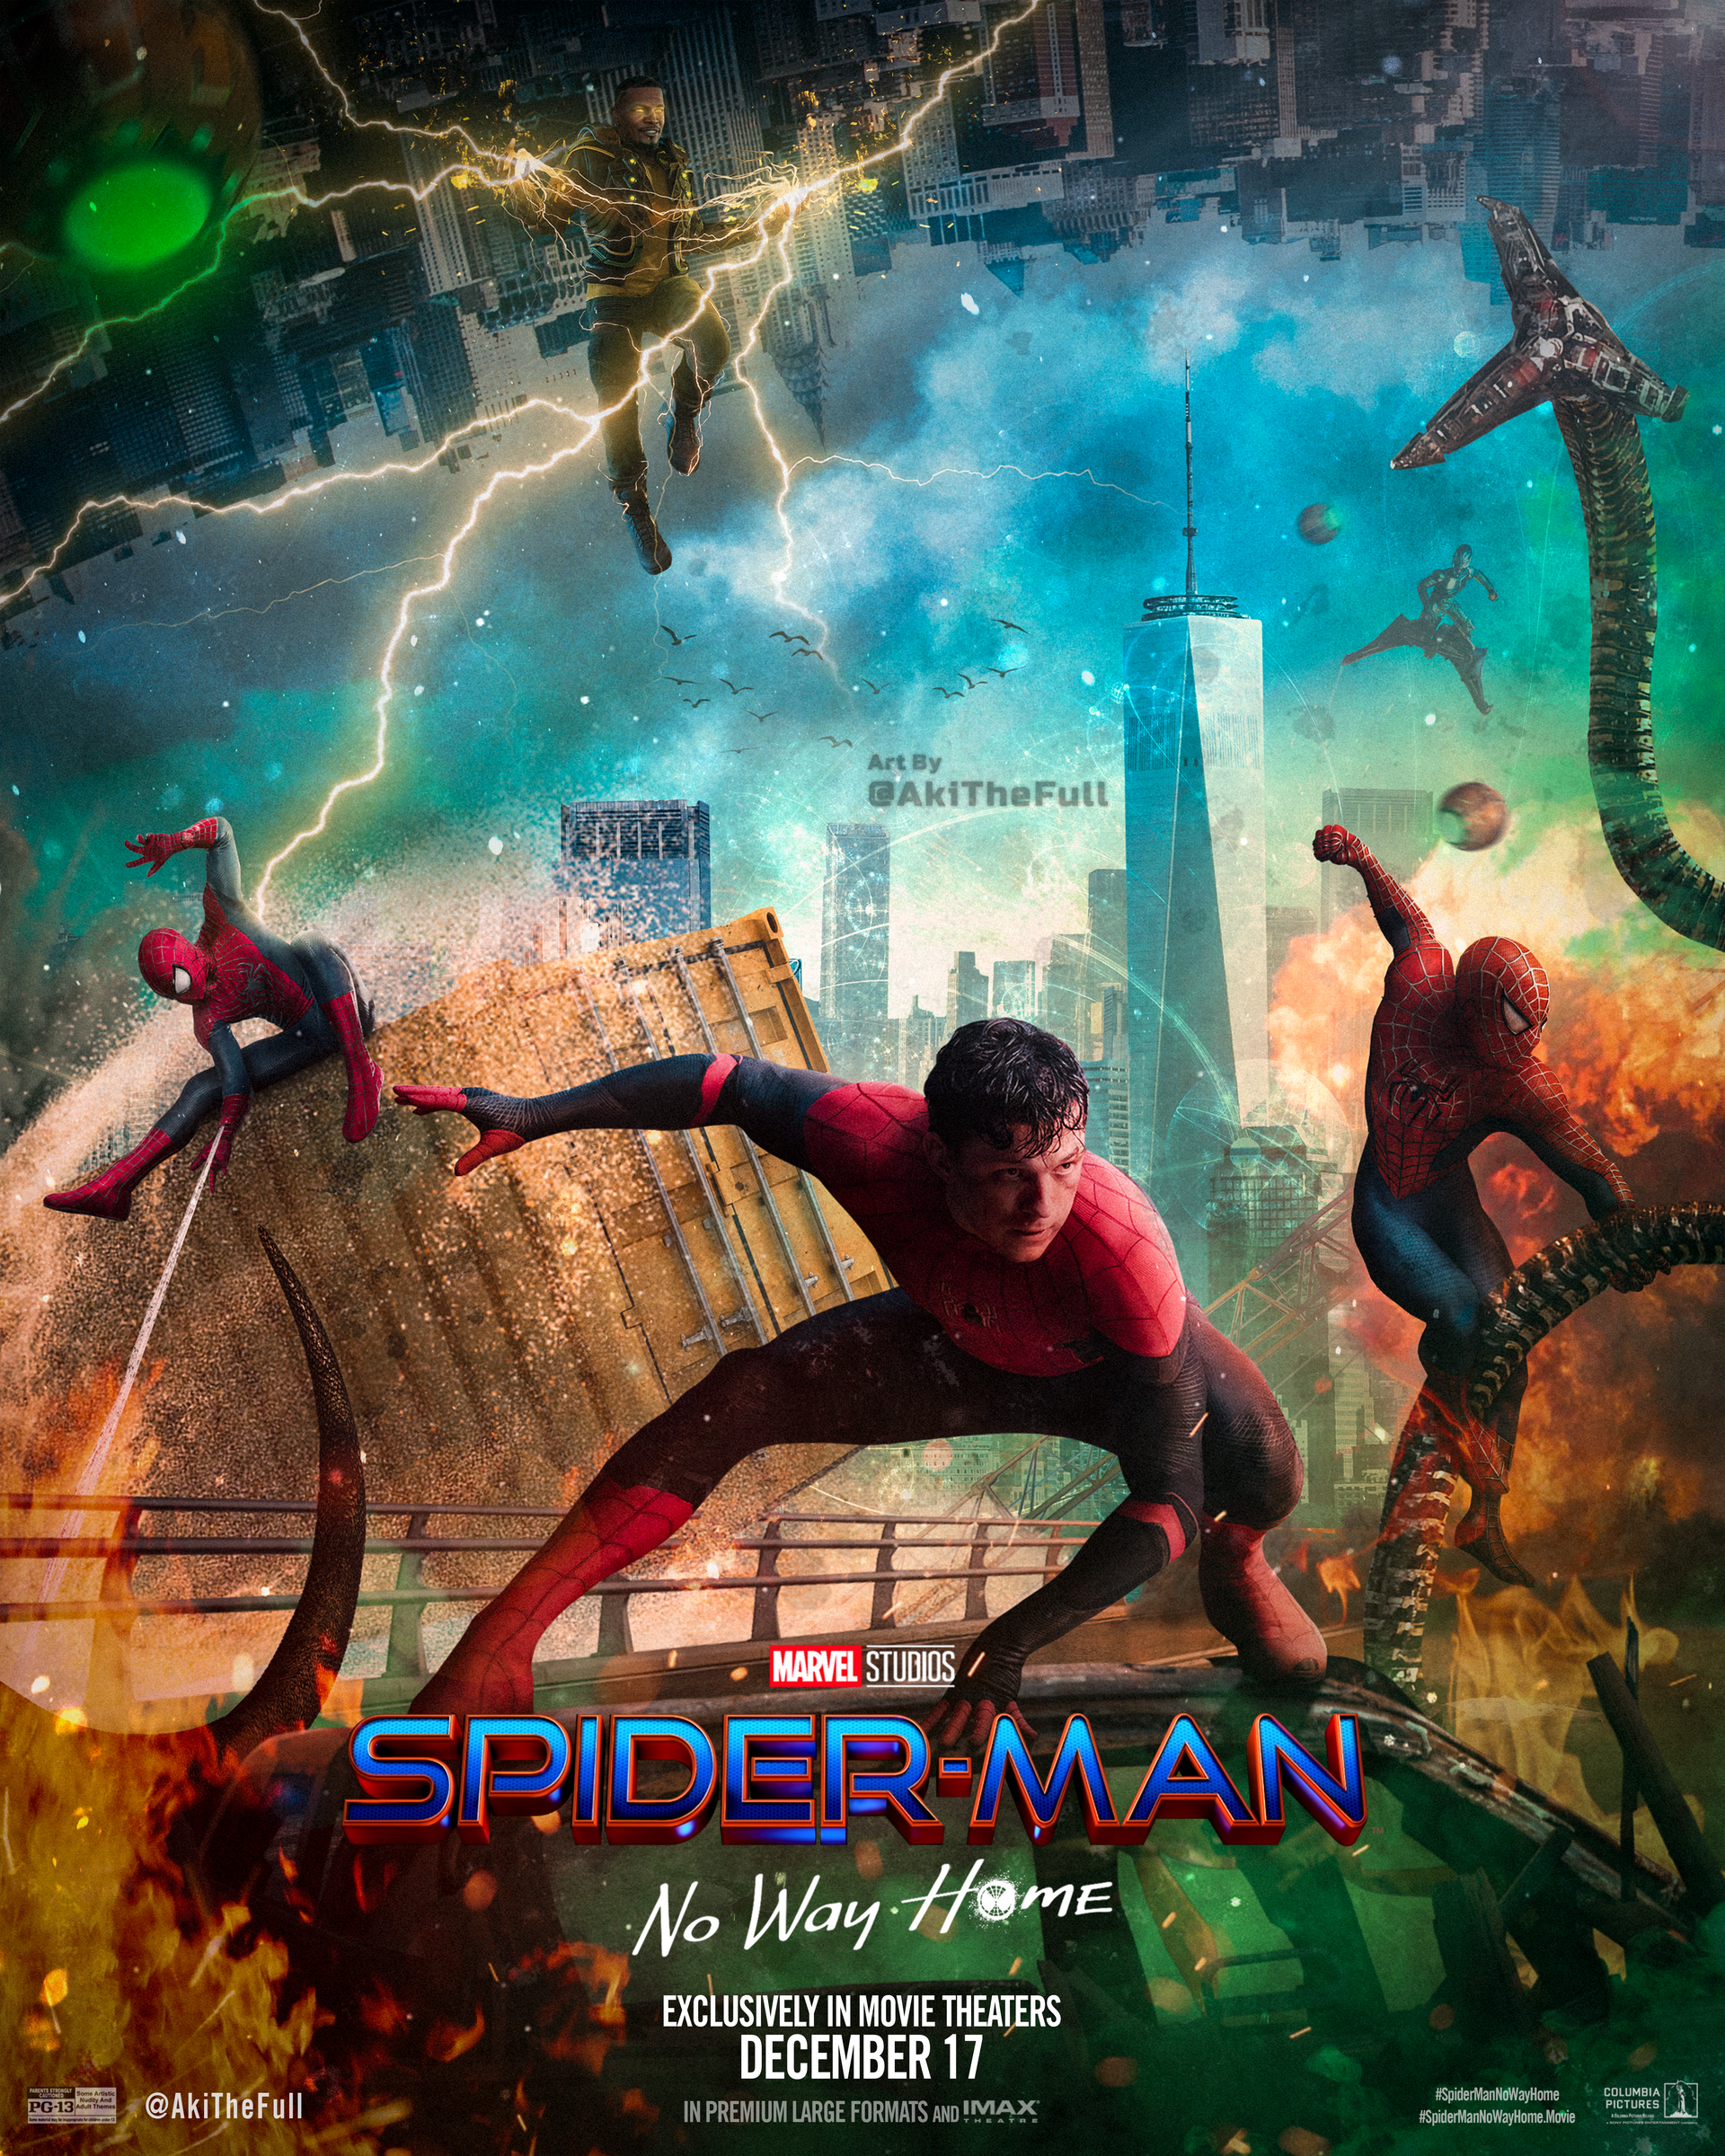 Spider-Man: No Way Home Trailer Poster by AkiTheFull on DeviantArt